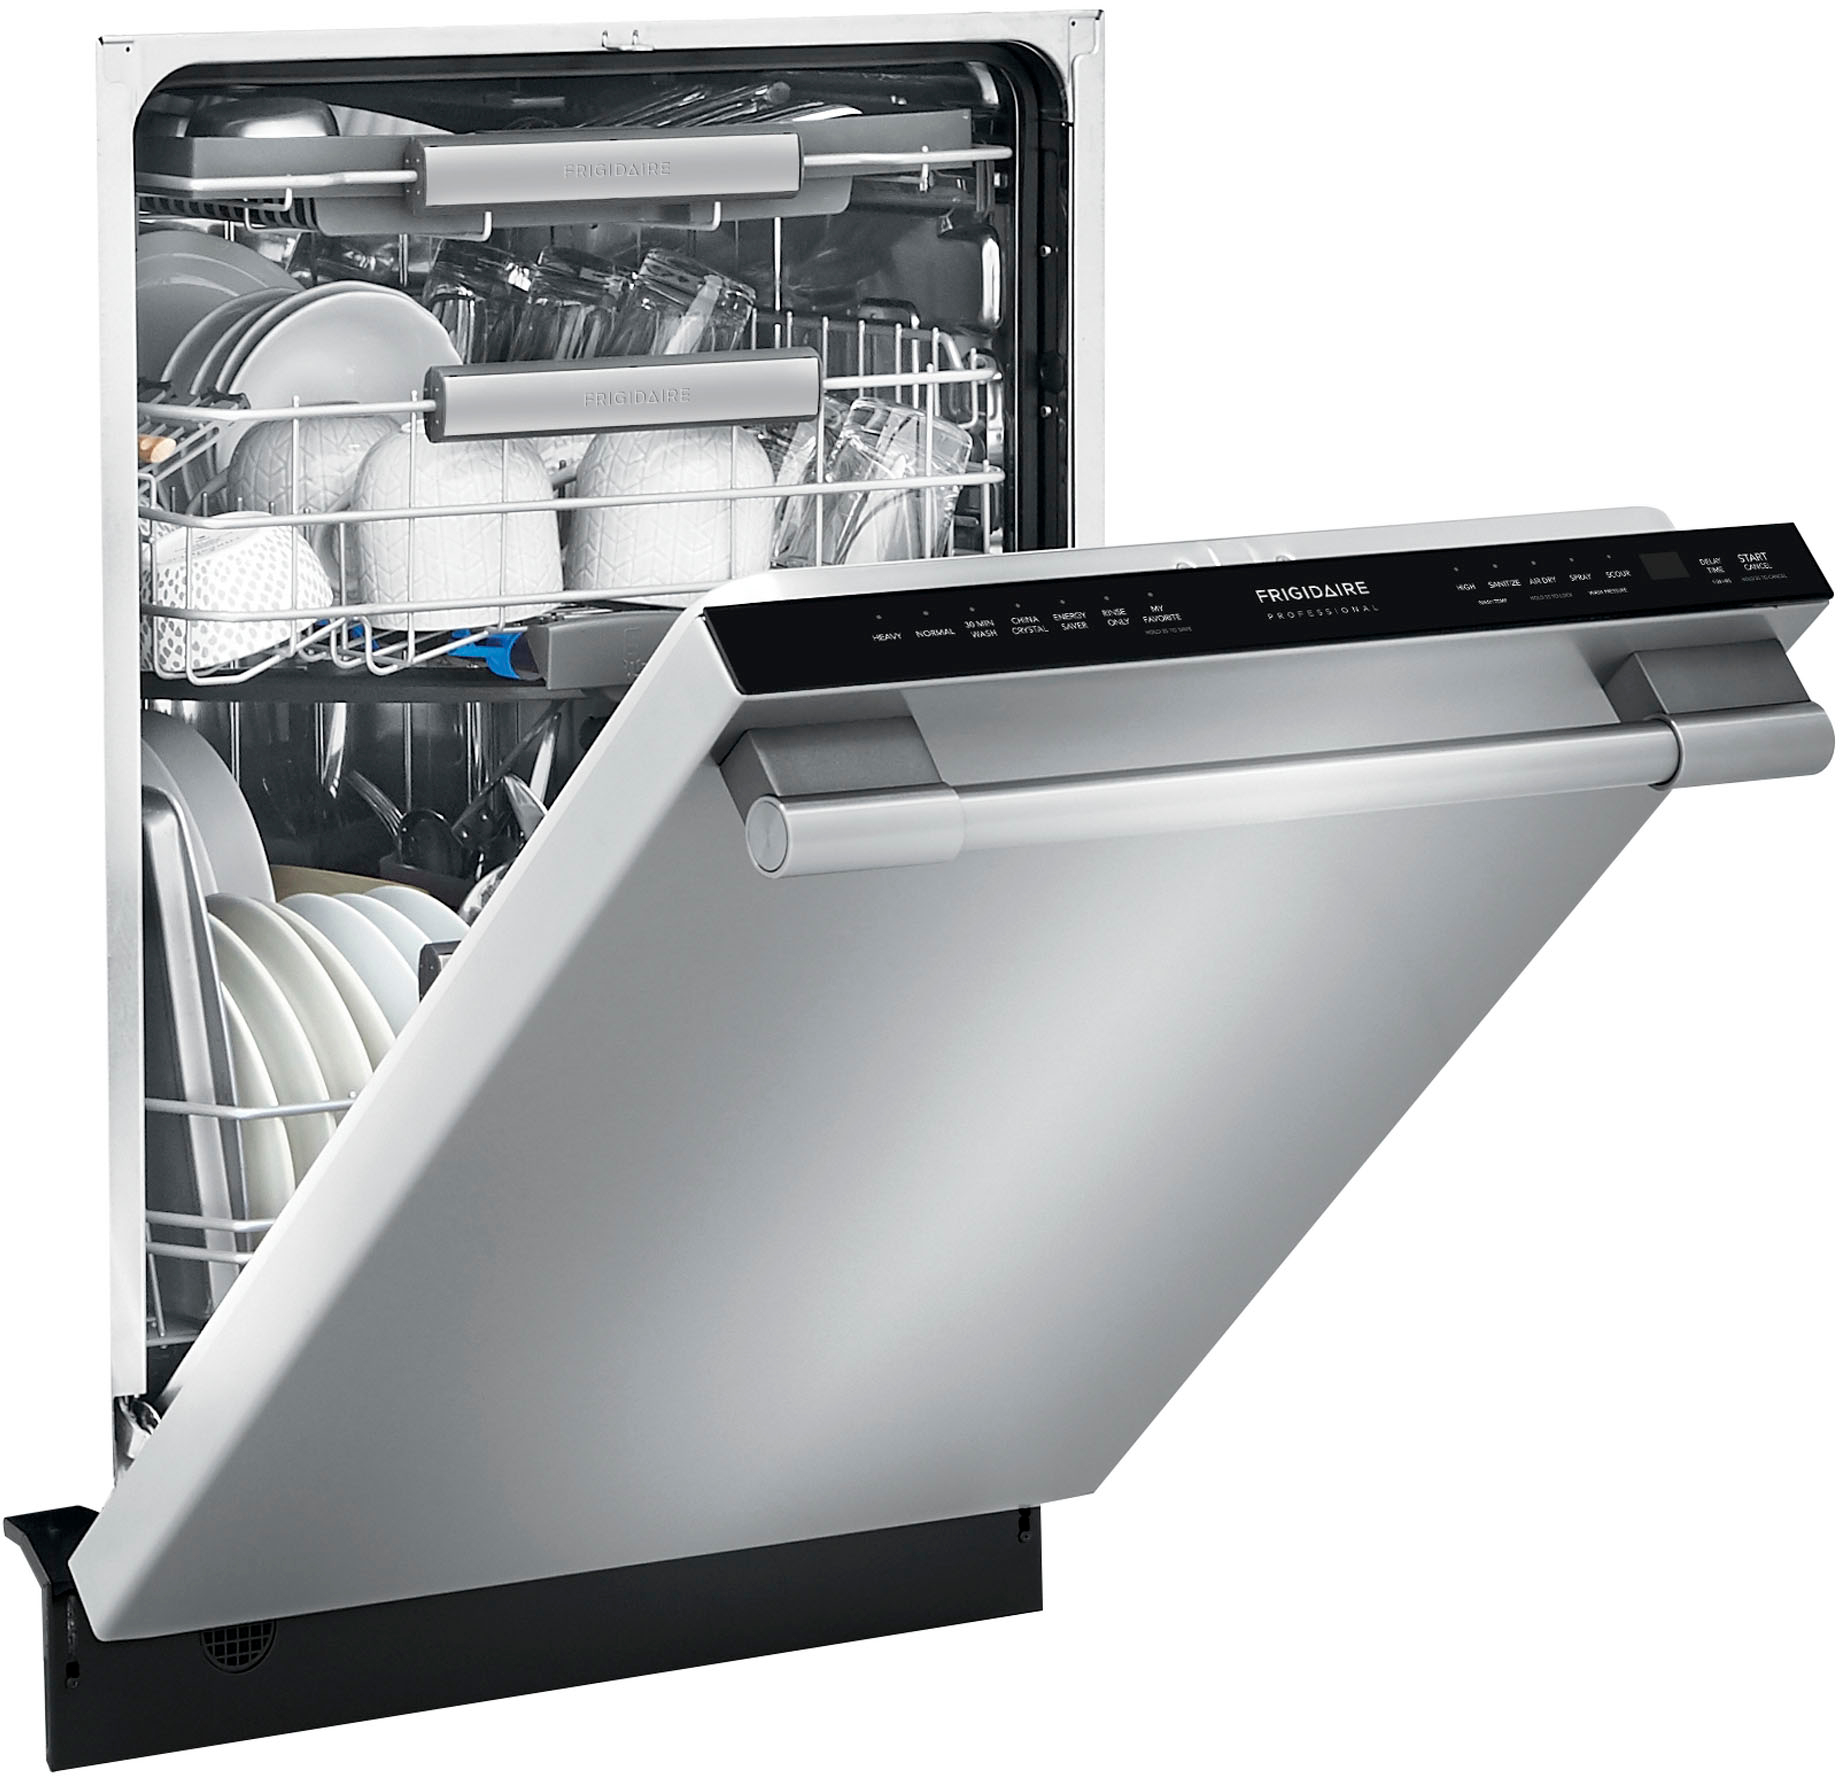 Professional Series 24 Built-In Dishwasher 